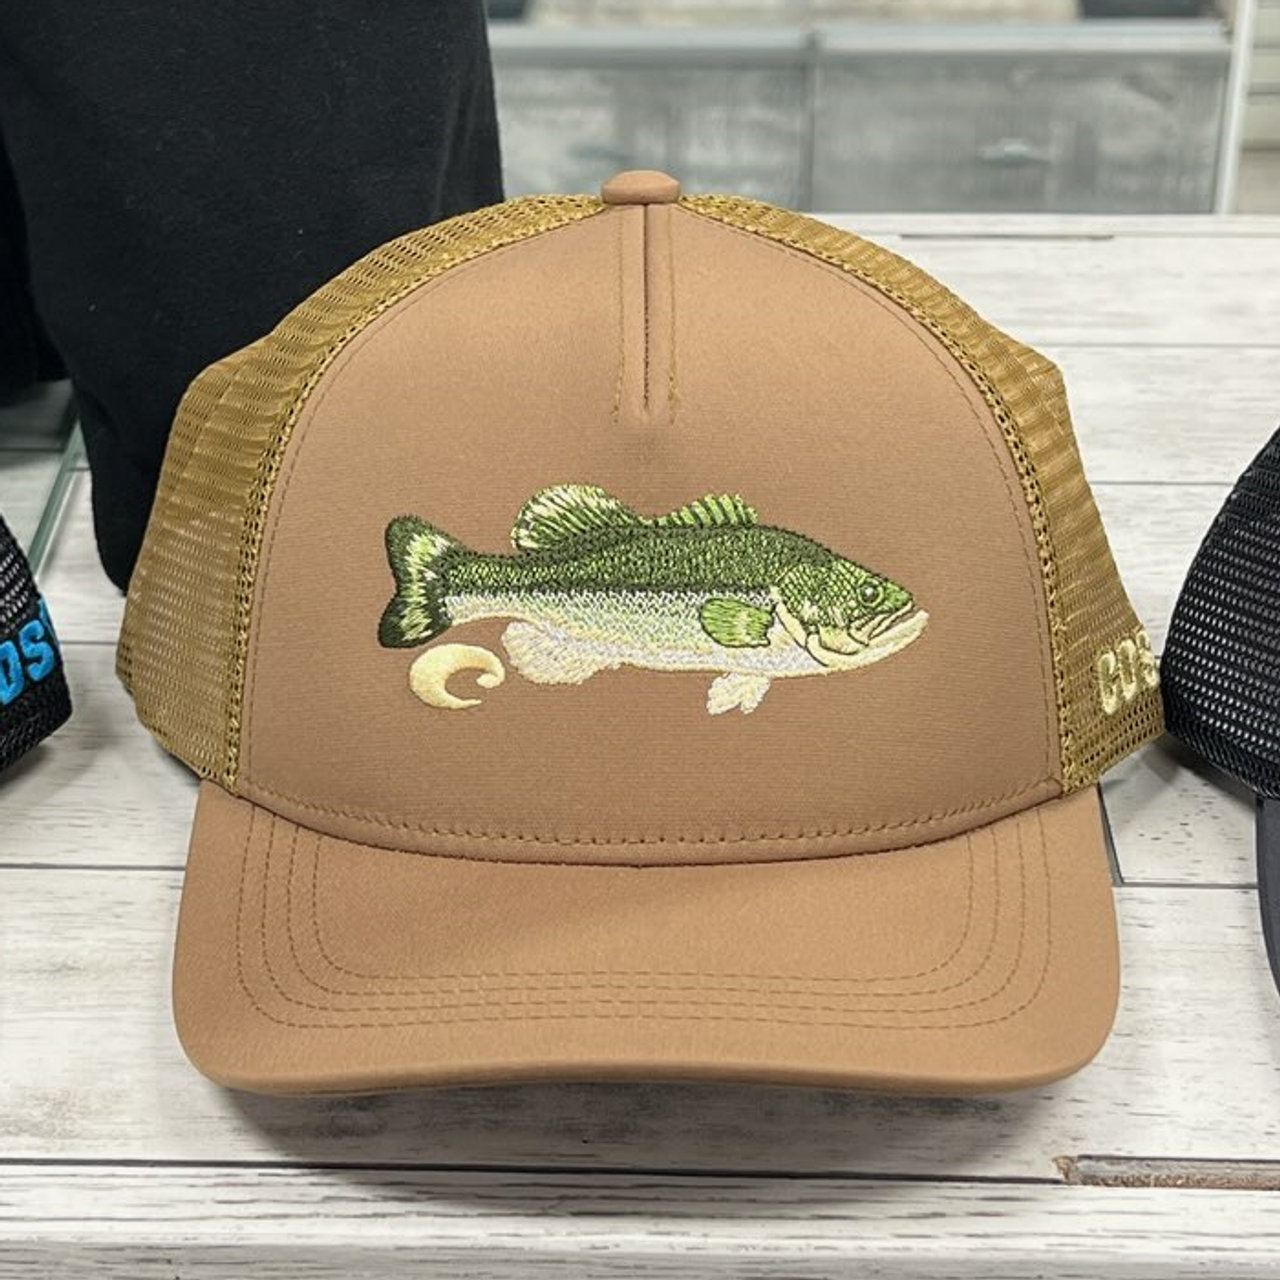 https://cdn11.bigcommerce.com/s-kk2jd0cxqh/images/stencil/1280x1280/products/18979/27683/costa-del-mar-costa-bass-stitched-trucker-working-brown__25186.1703766580.png?c=1